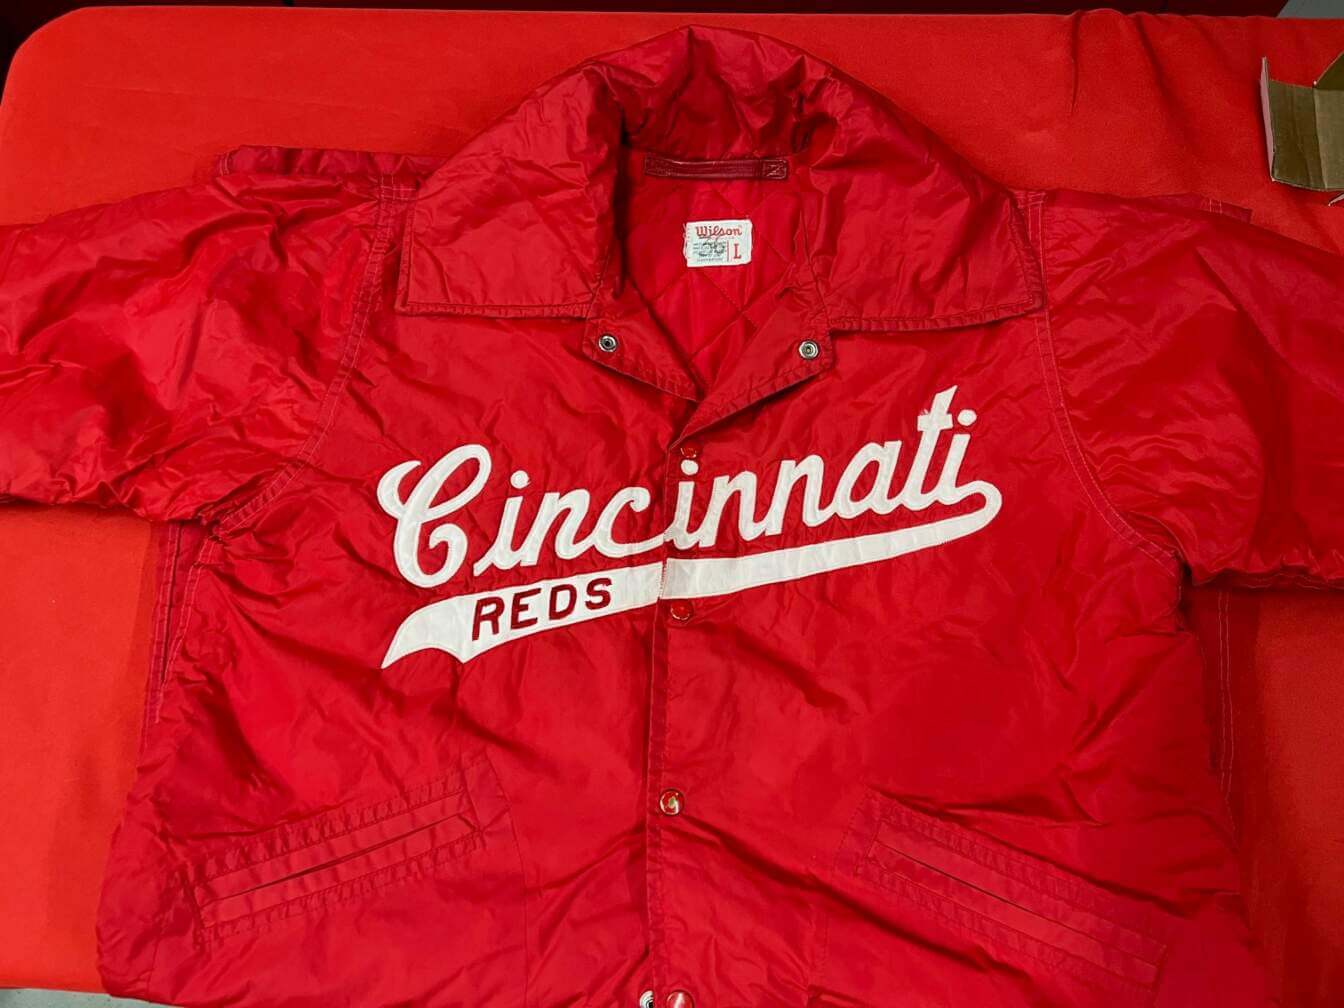 Reds Wore Full-Length Ponchos in ’72 World Series